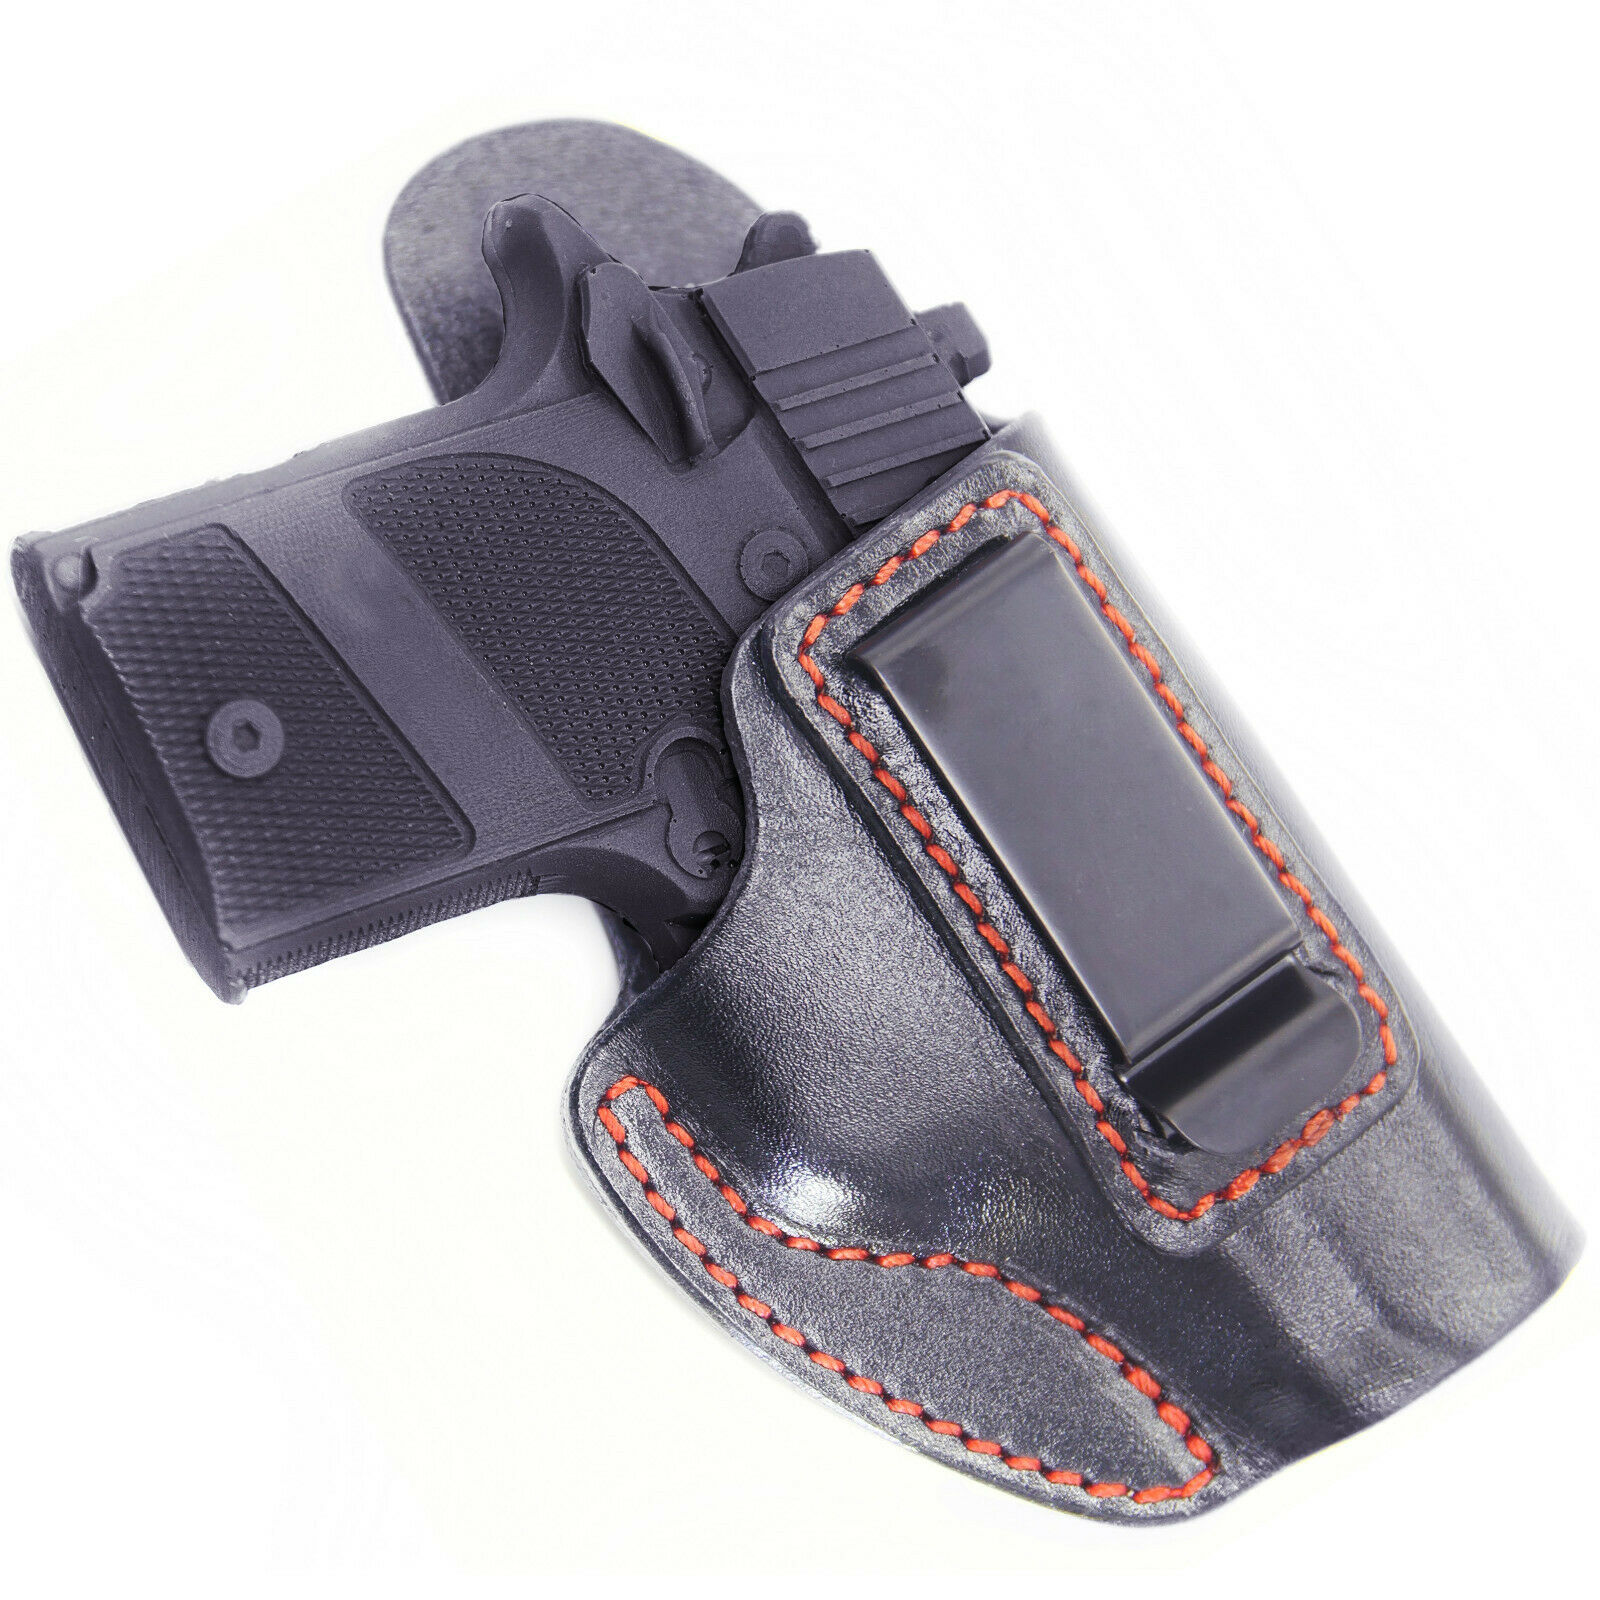 P938 9mm IWB Molded Leather Concealed Carry Holster CCW BLACK RH Sig Sauer 938 